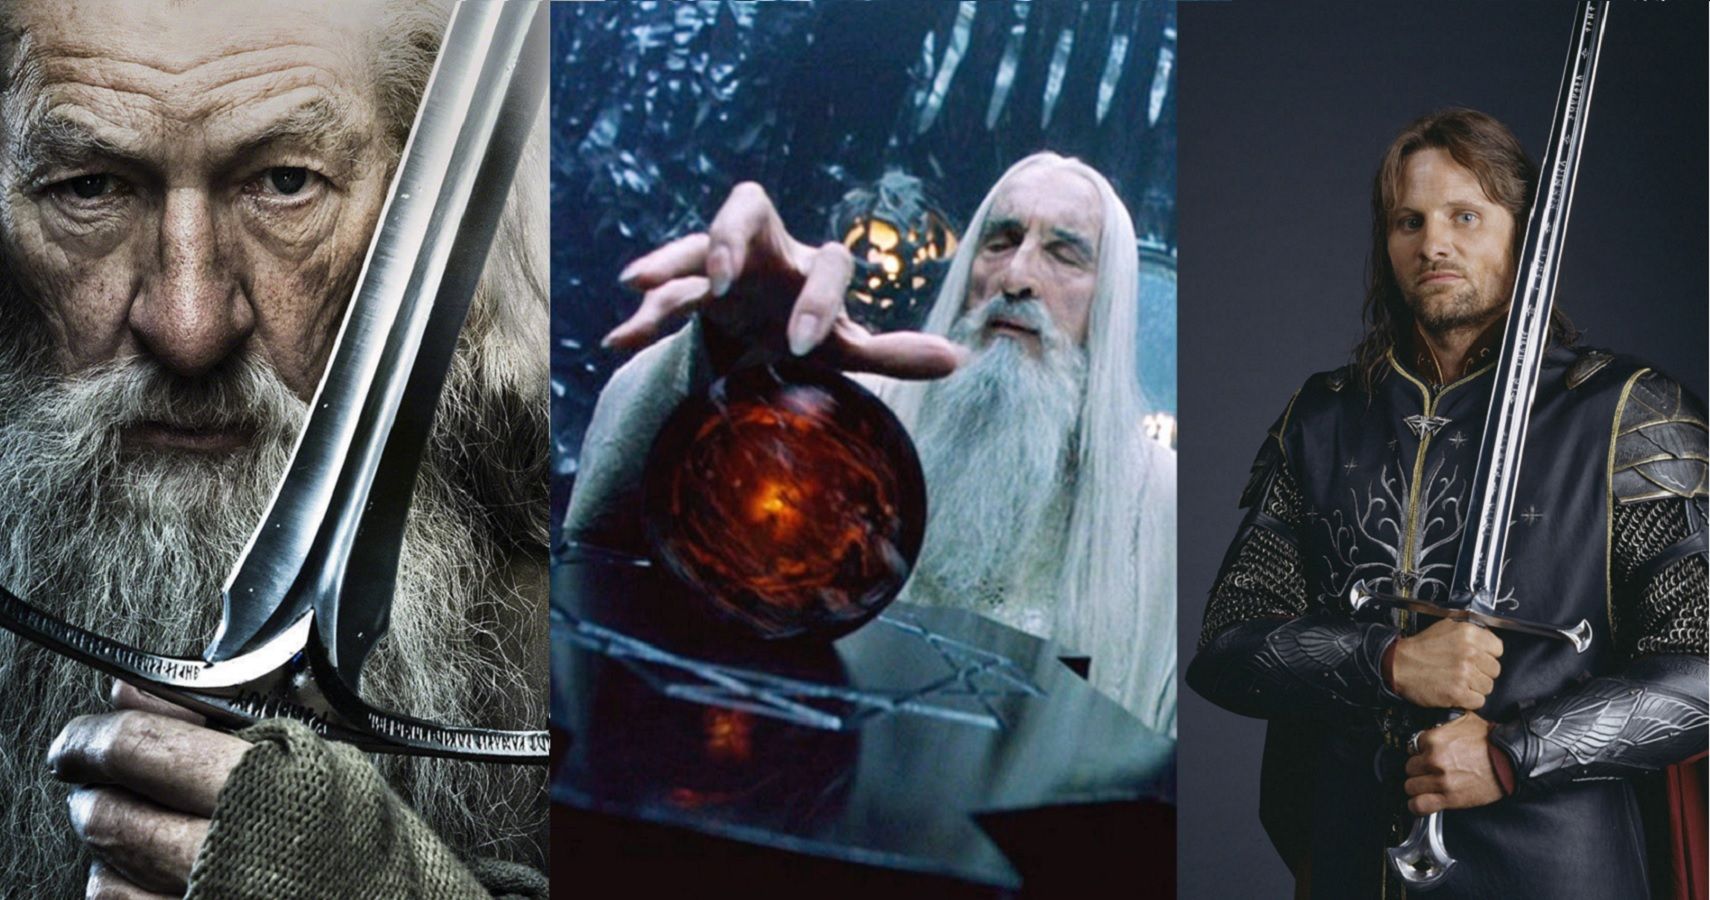 The Hobbit: An Unexpected Journey | The One Wiki to Rule Them All | Fandom